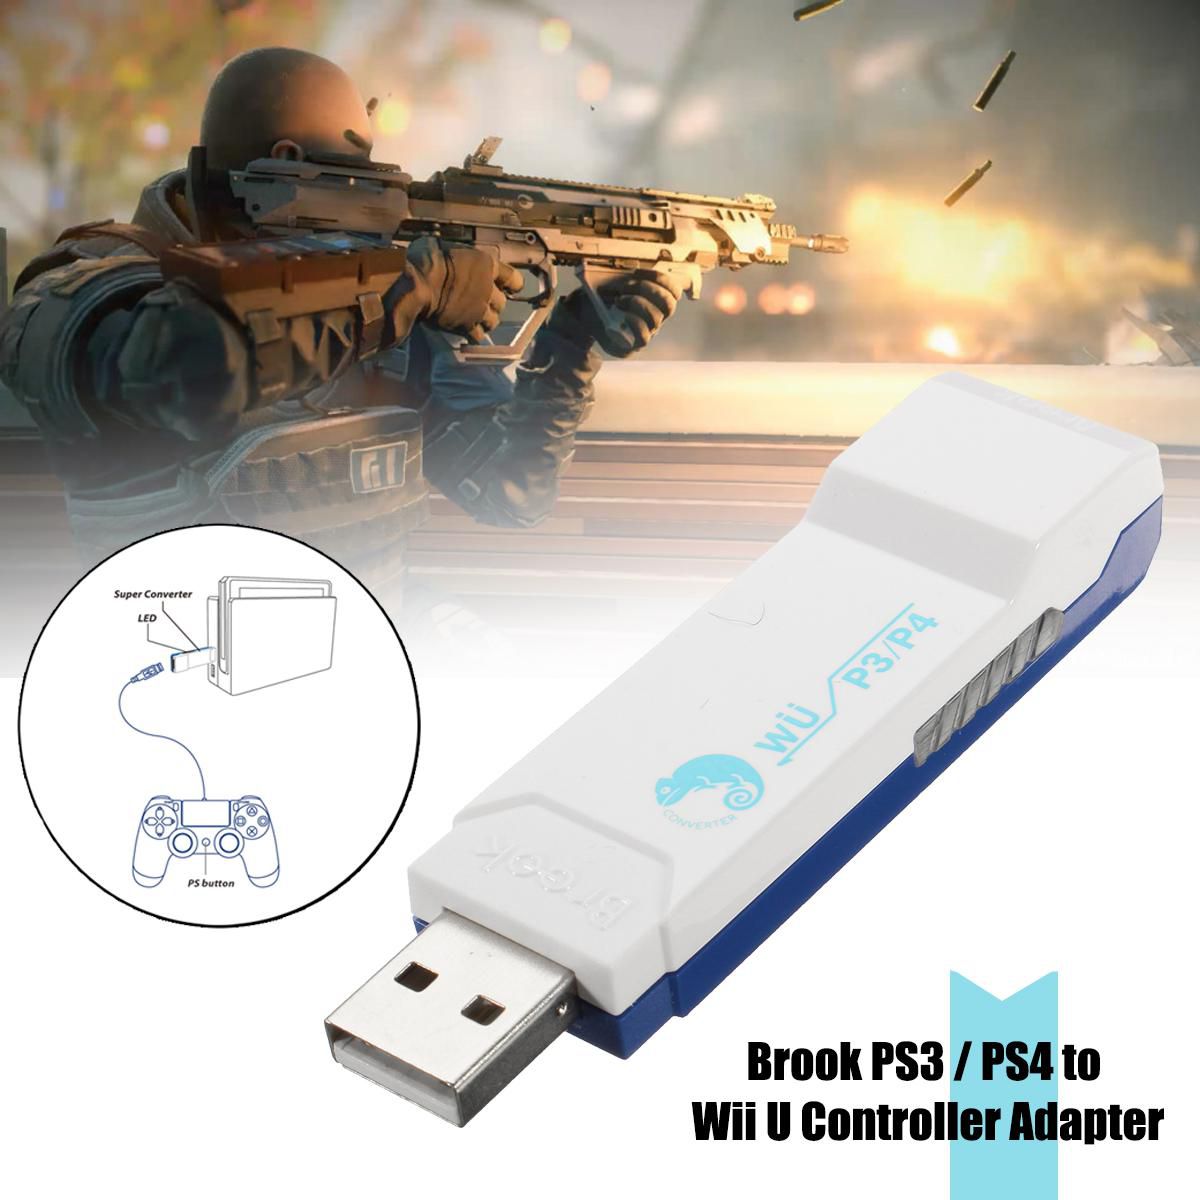 Buy Brook Ps3 Ps4 Usb Controller To Wii U Ns Pc Console Converter Adapter Edition Online At Low Price In India Snapdeal